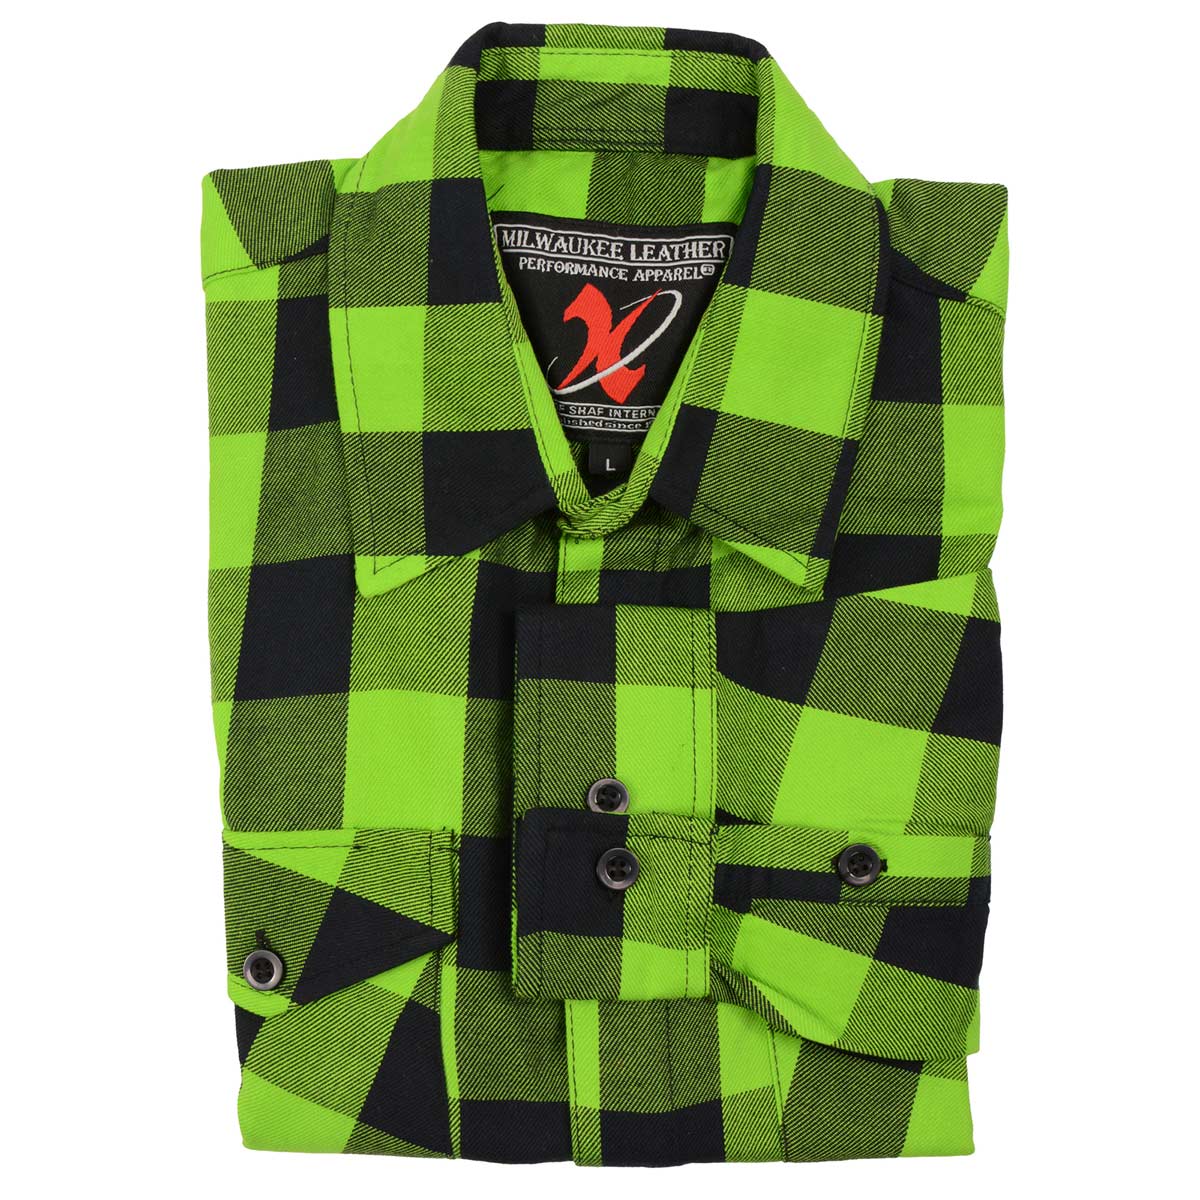 Milwaukee Leather Men's Flannel Plaid Shirt Green and White Long Sleeve  Cotton Button Down Shirt MNG11636